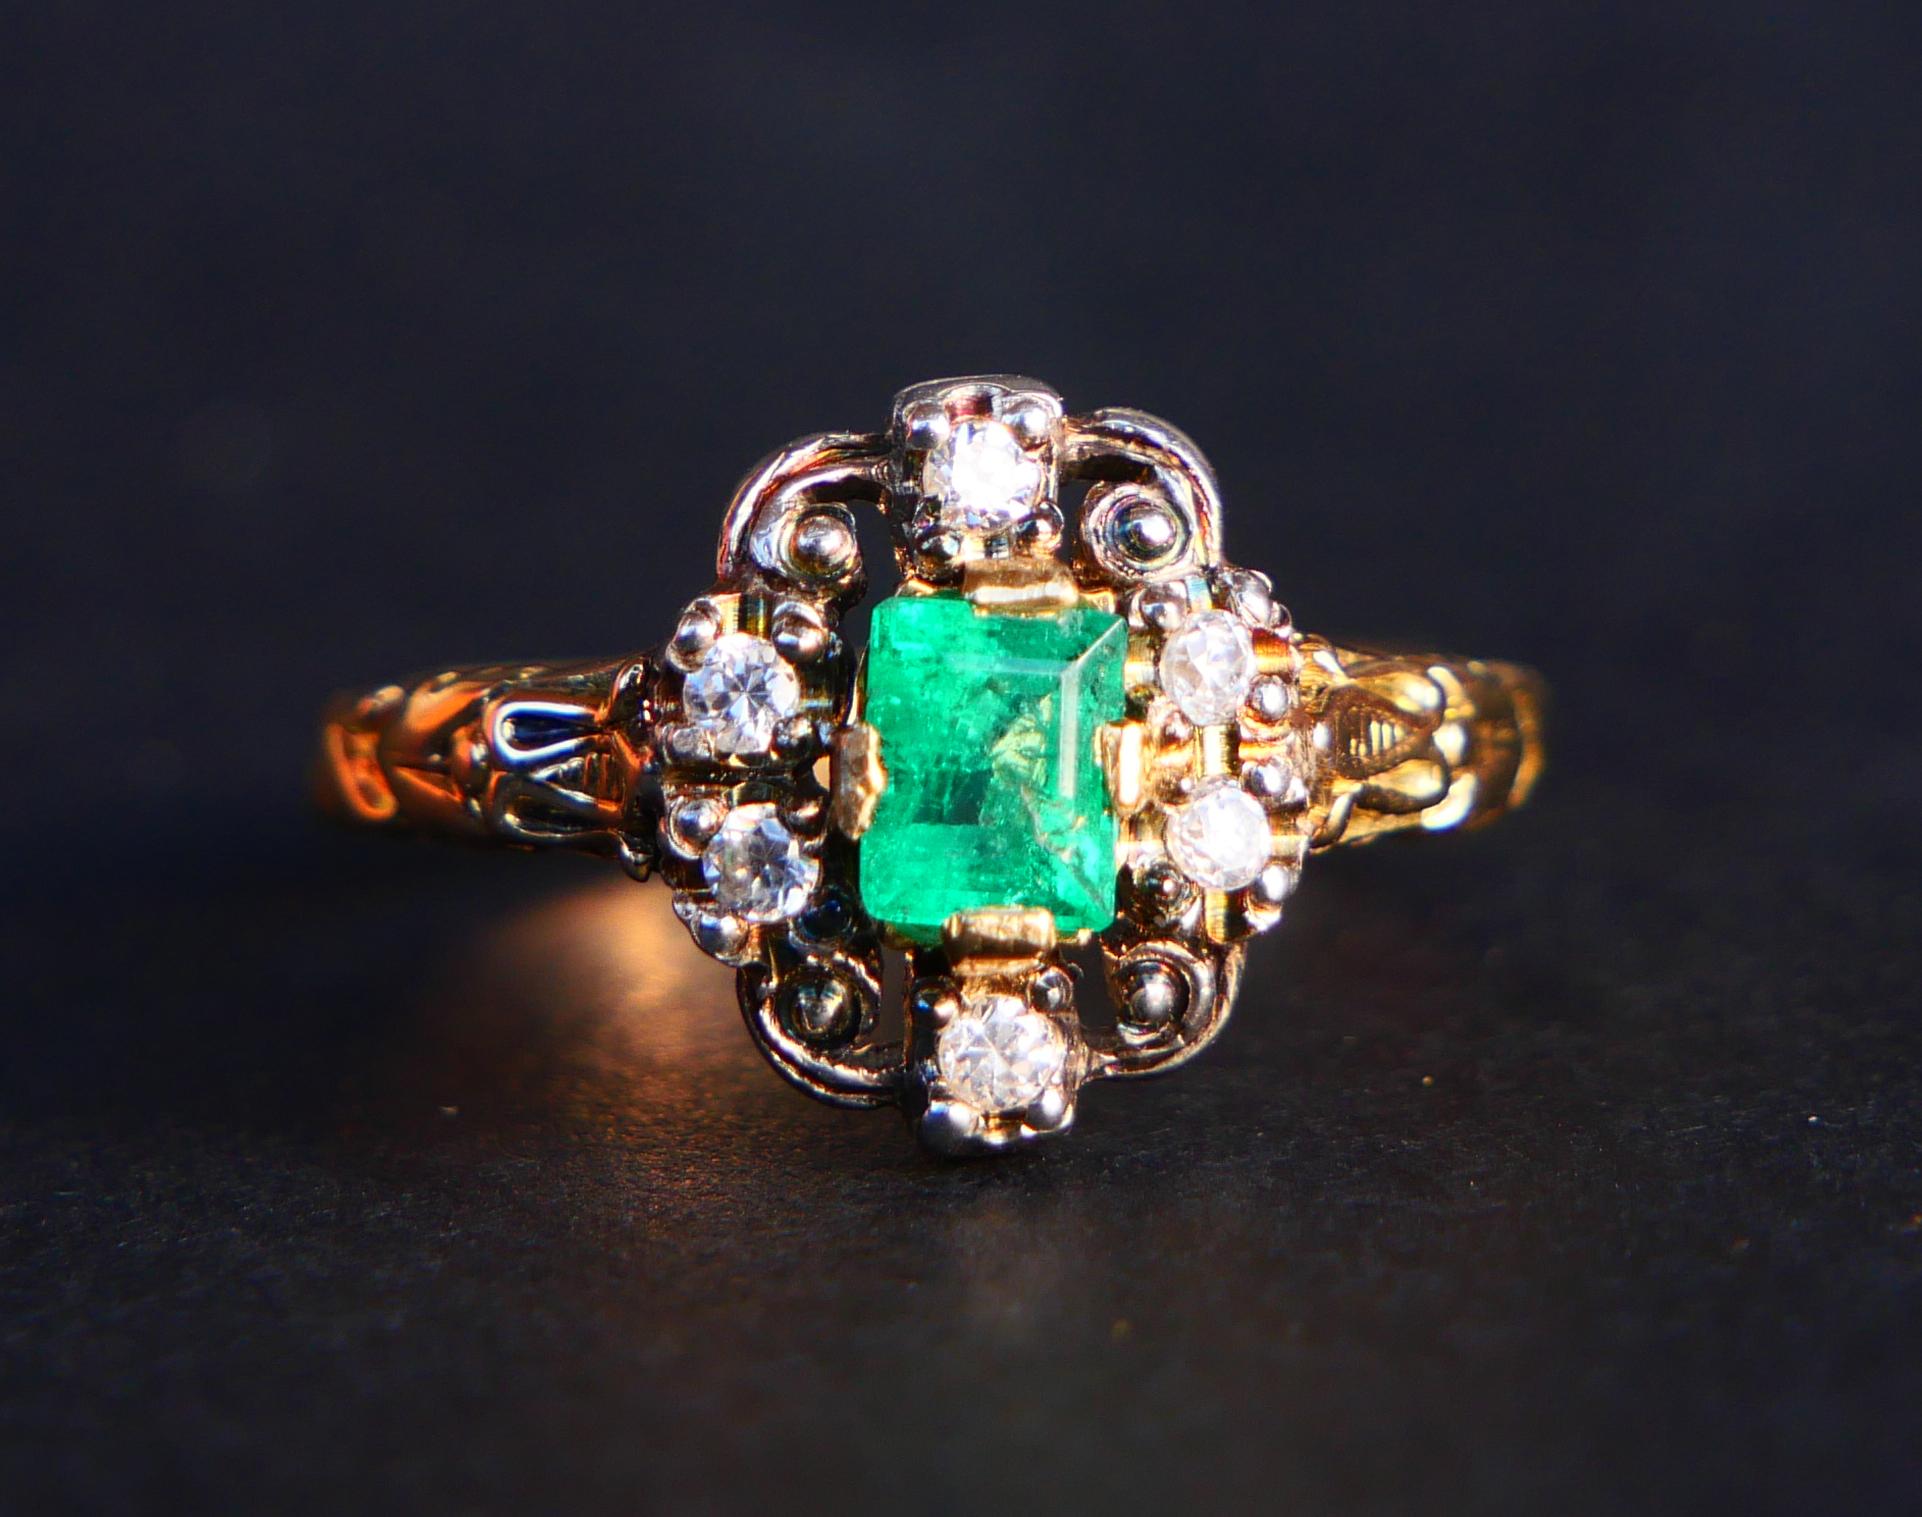 Beautiful Emerald and Diamonds Ring made in 1937.

The crown is composite with the top parts in Silver, all other parts are solid 18K Yellow Gold. Natural emerald cut Emerald stone of vibrant Green 5.5 mm x 4 mm x 3.2 mm deep /0.5 ct accented with 6